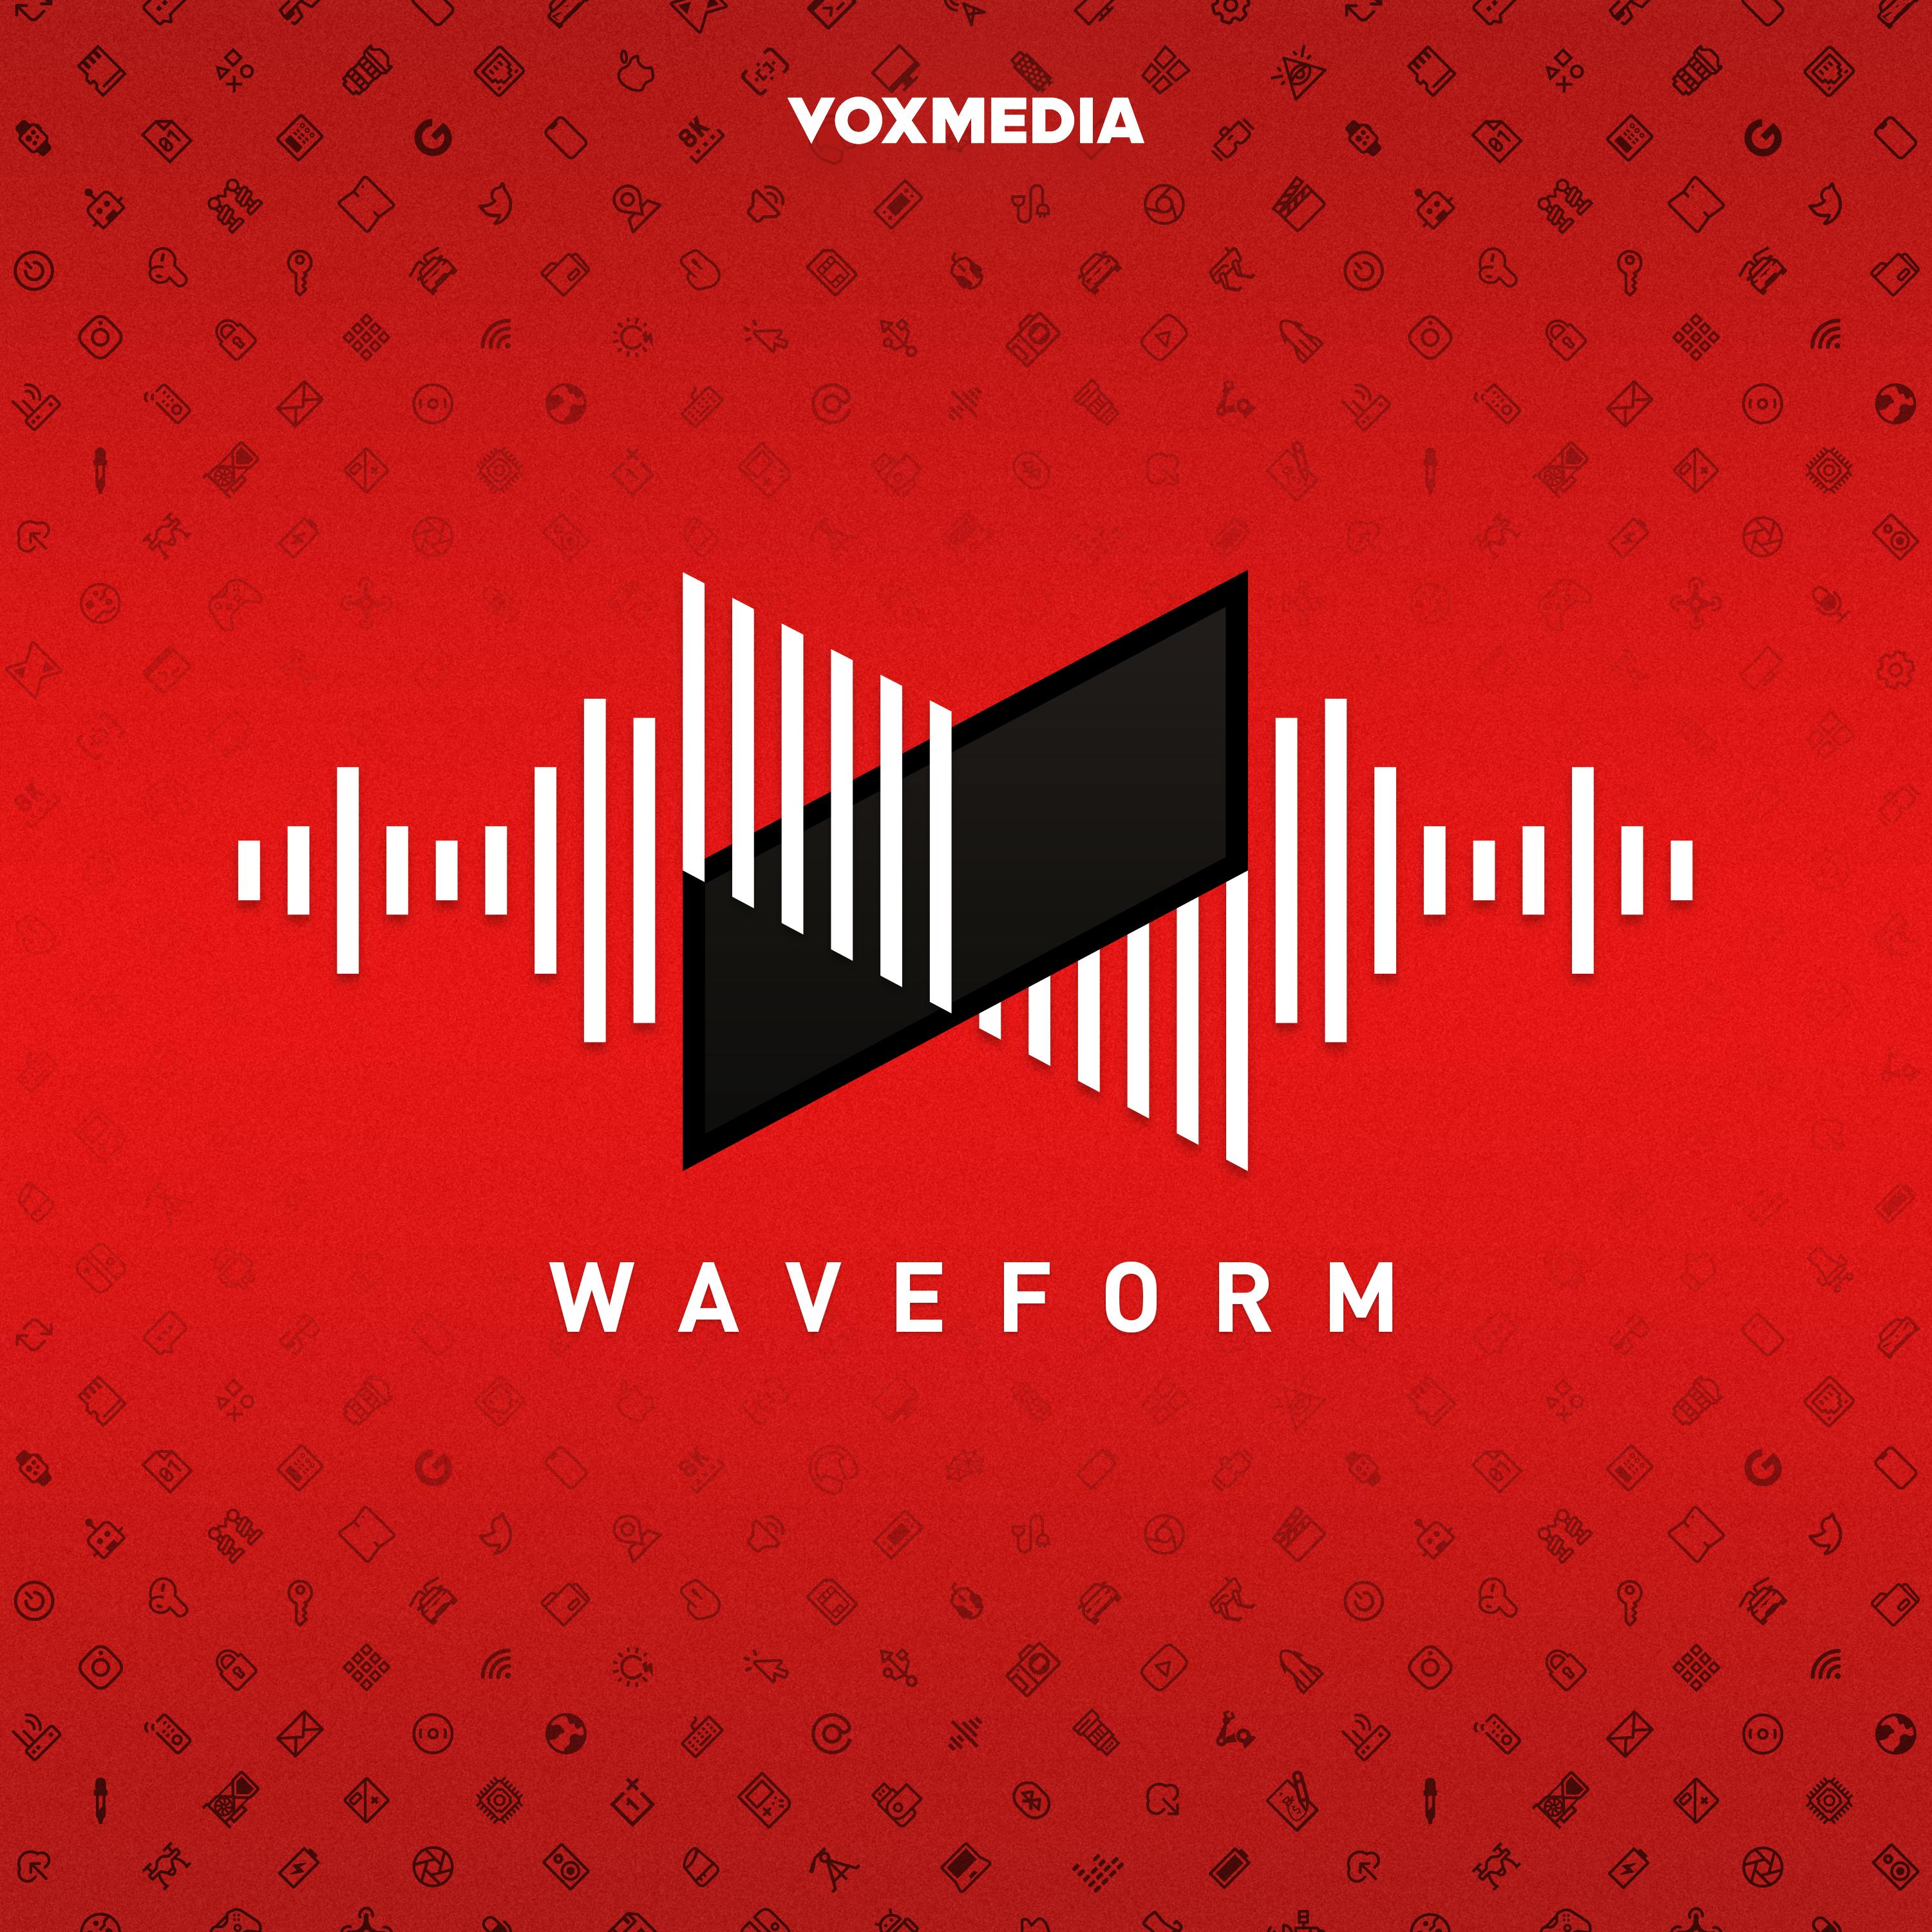 Waveform: The MKBHD Podcast podcast show image